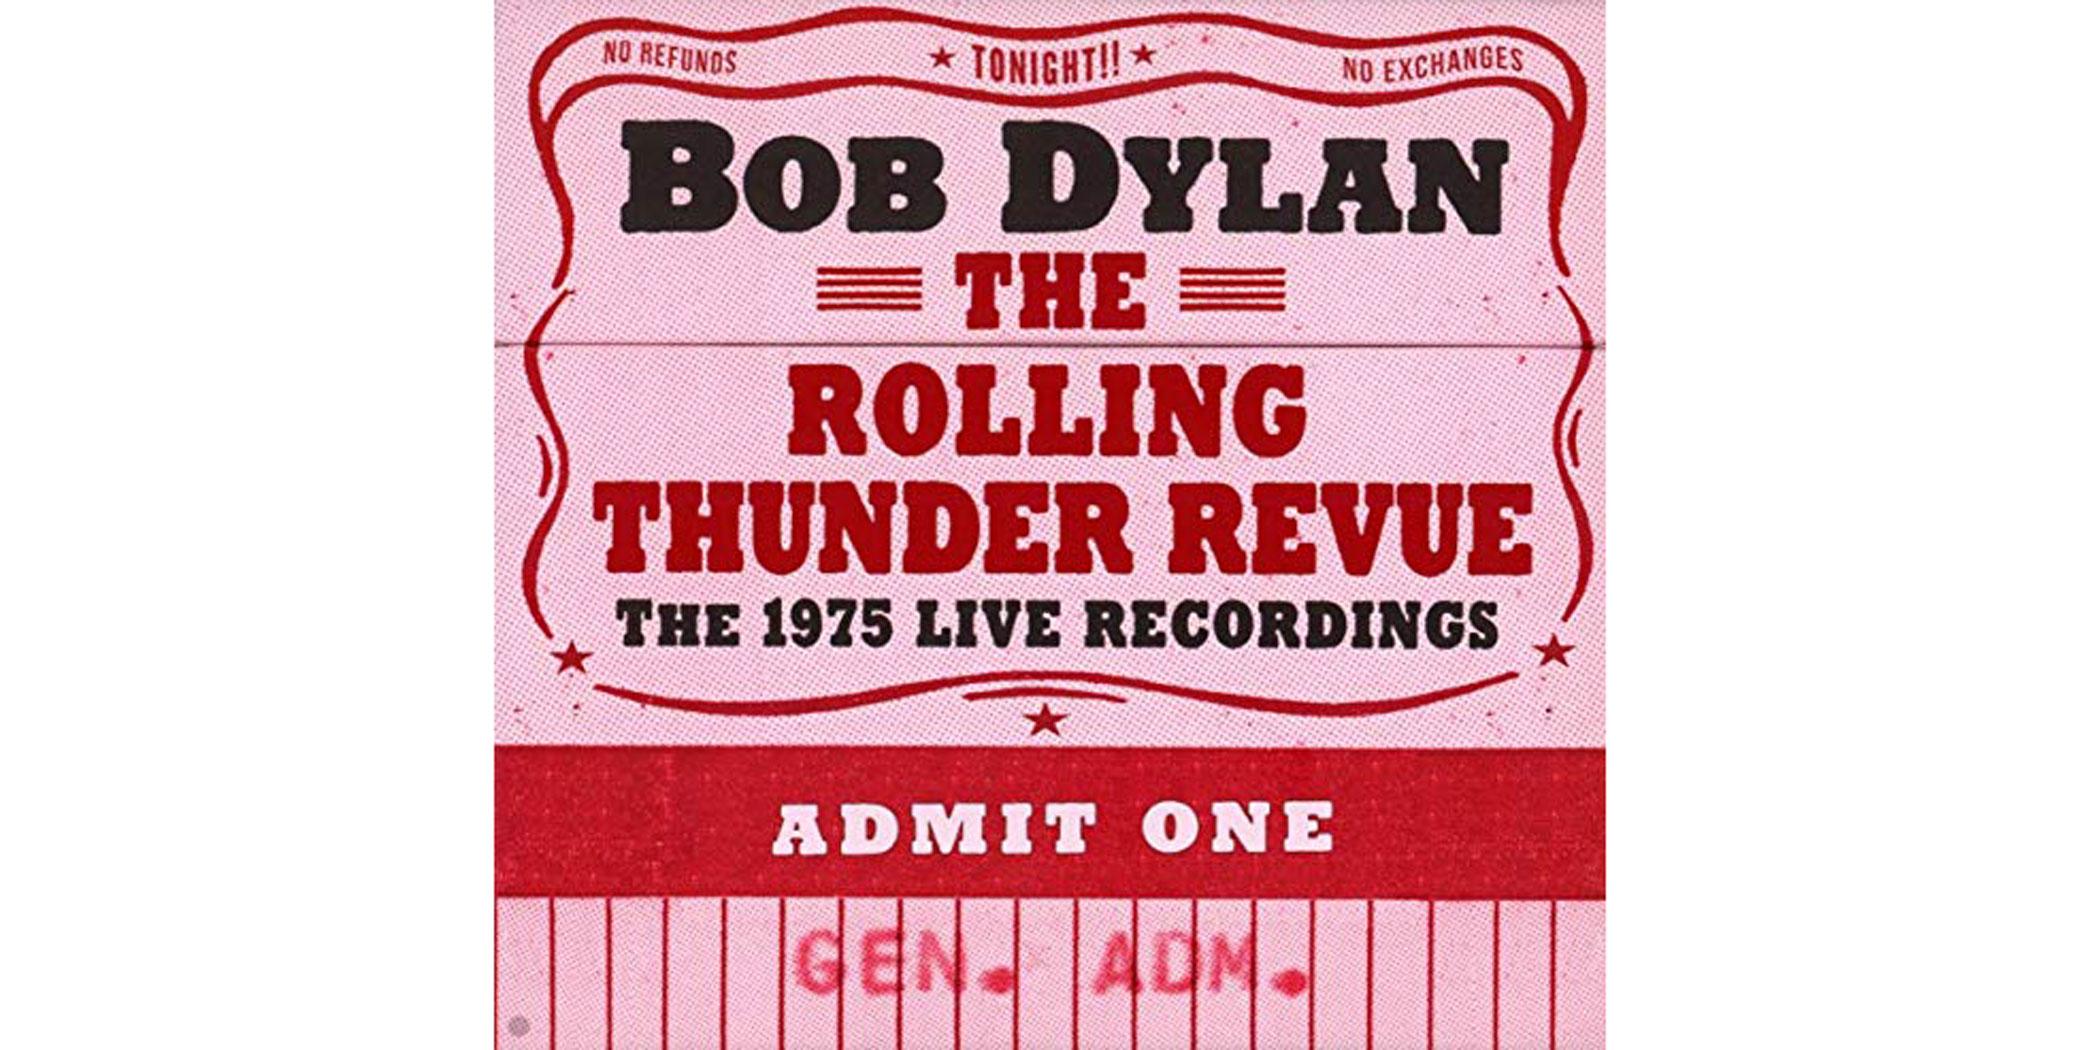 The Rolling Thunder Revue: The 1975 Live Recordings, Bob Dylan